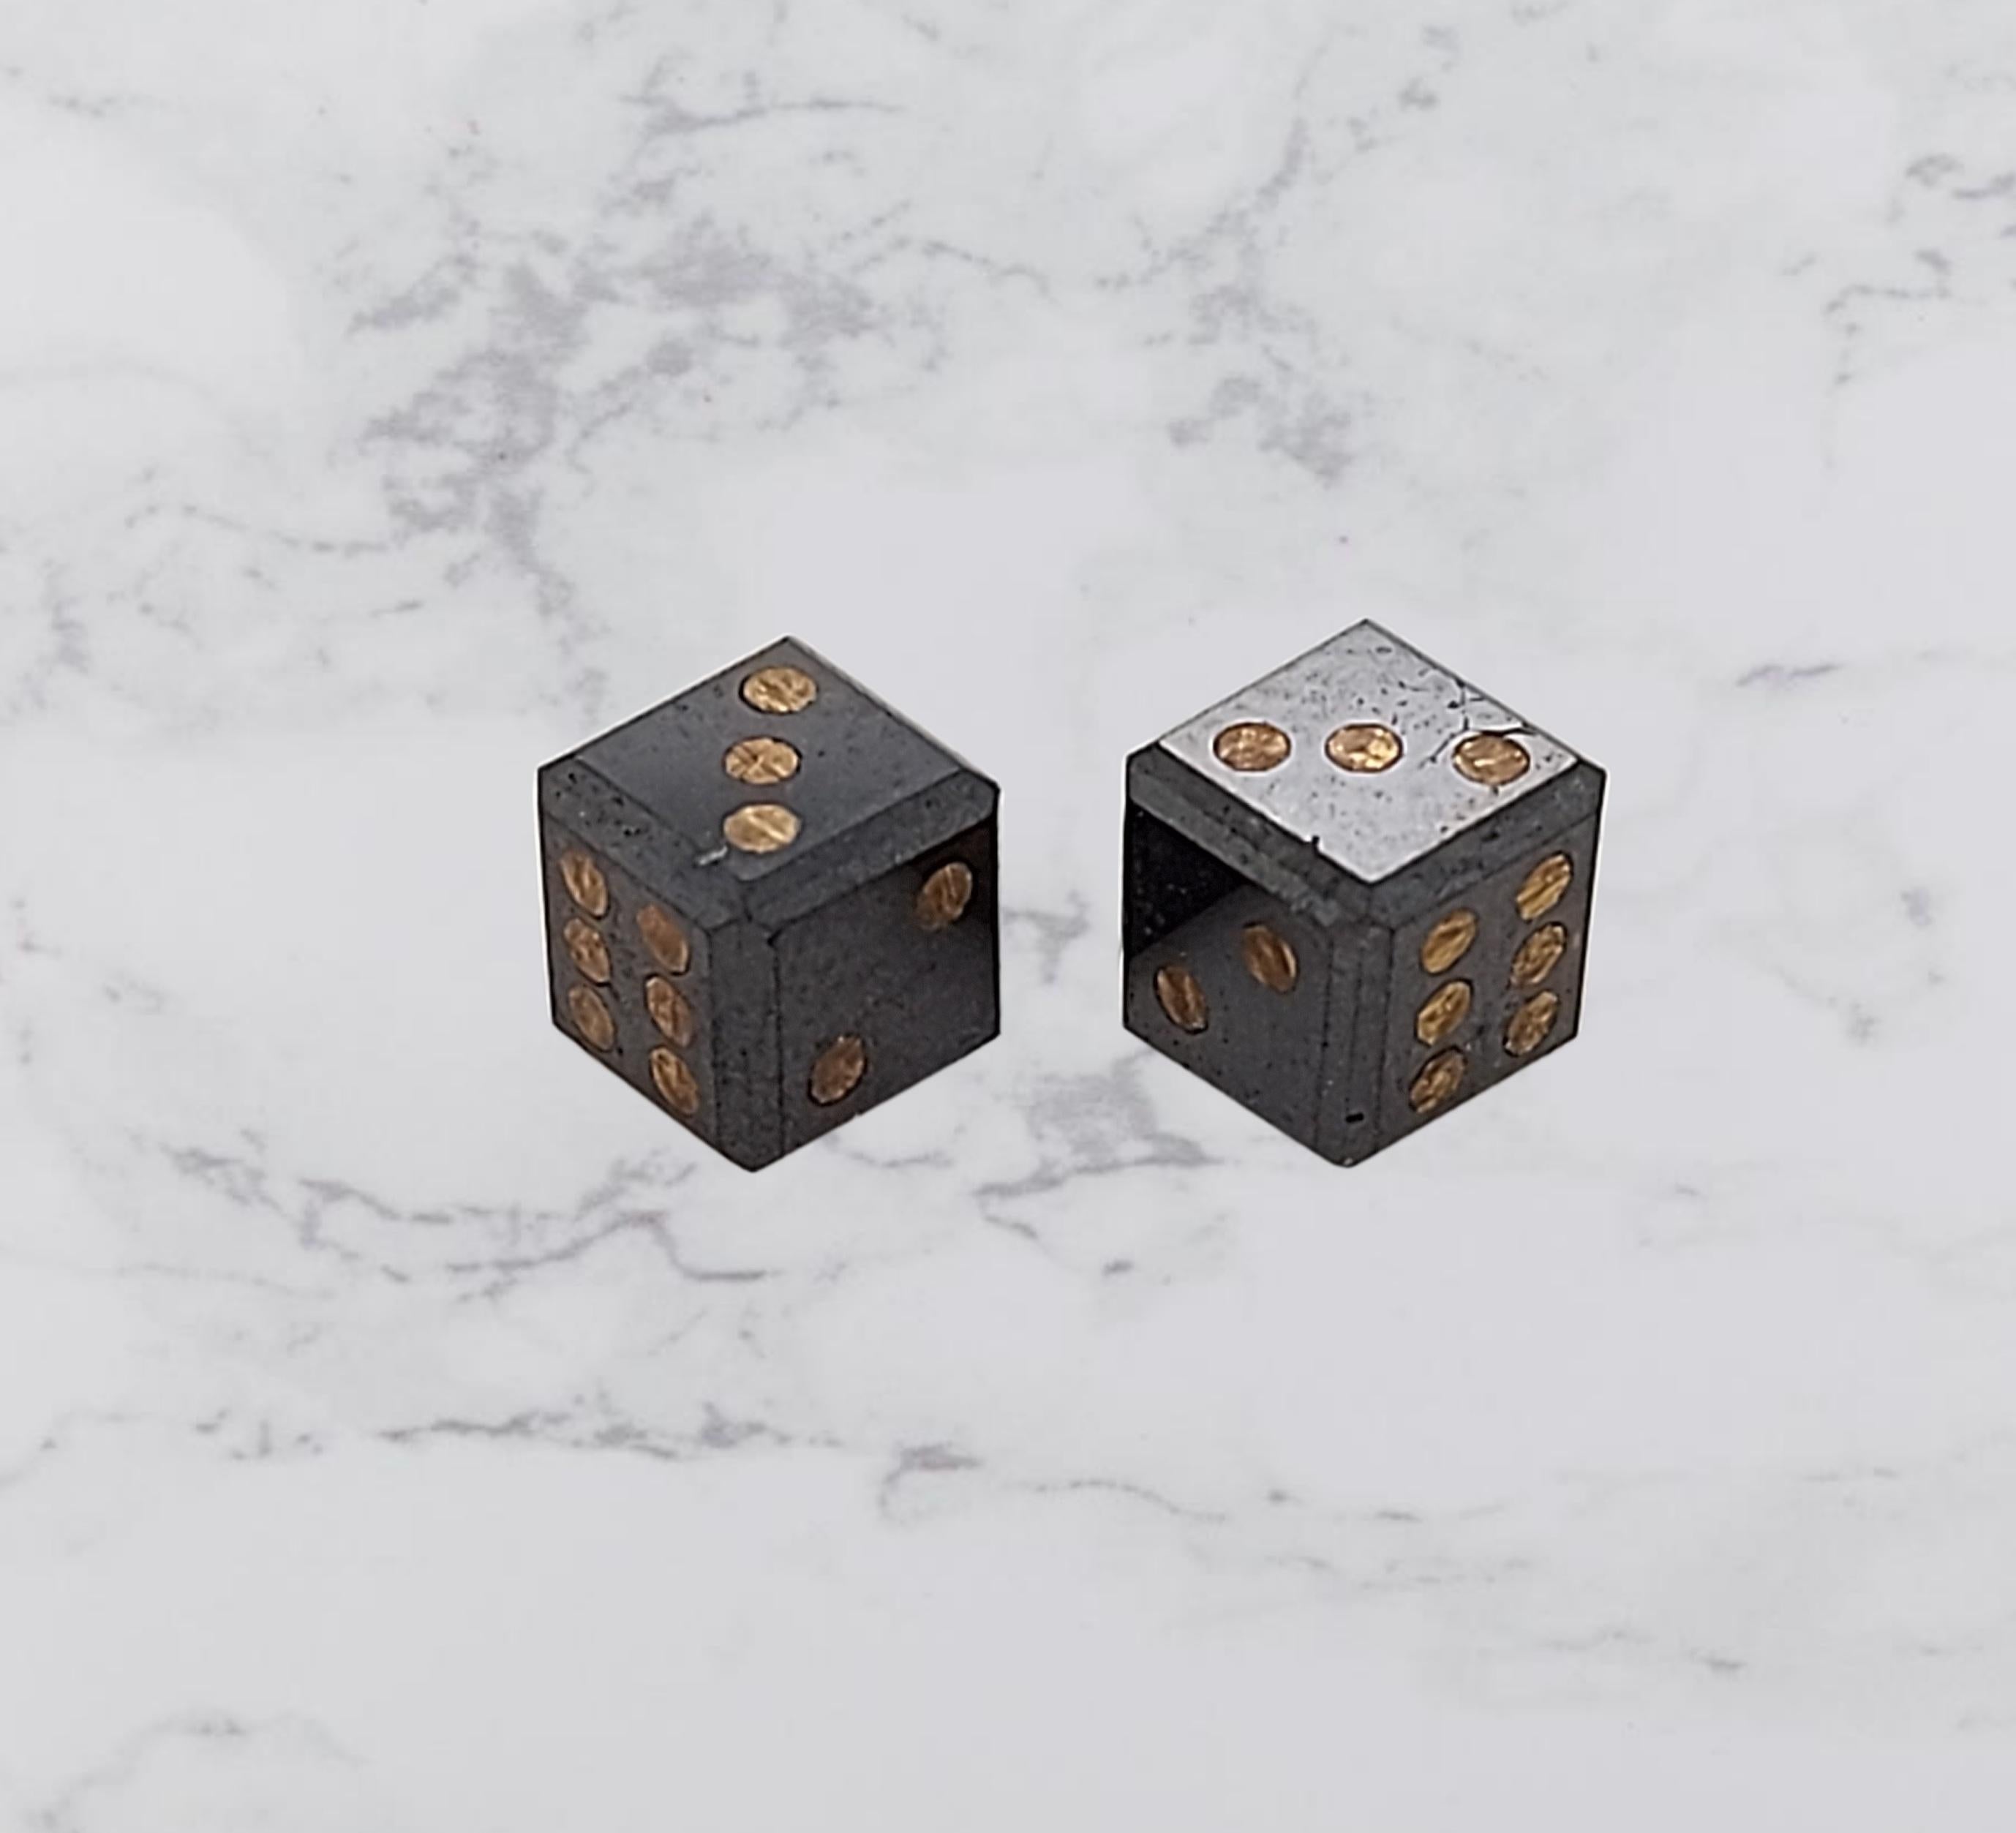 Pair of natural 2,17 Carat Black Diamond Cubes / Dice with gold inlay, 4 mm

The dice are inlaid with gold dots to mark their numbers.
The purity of the gold is not tested.

Measurements: 4 mm x 4 mm

Total weight: 0.4 gram / 0.015 oz / 0.3